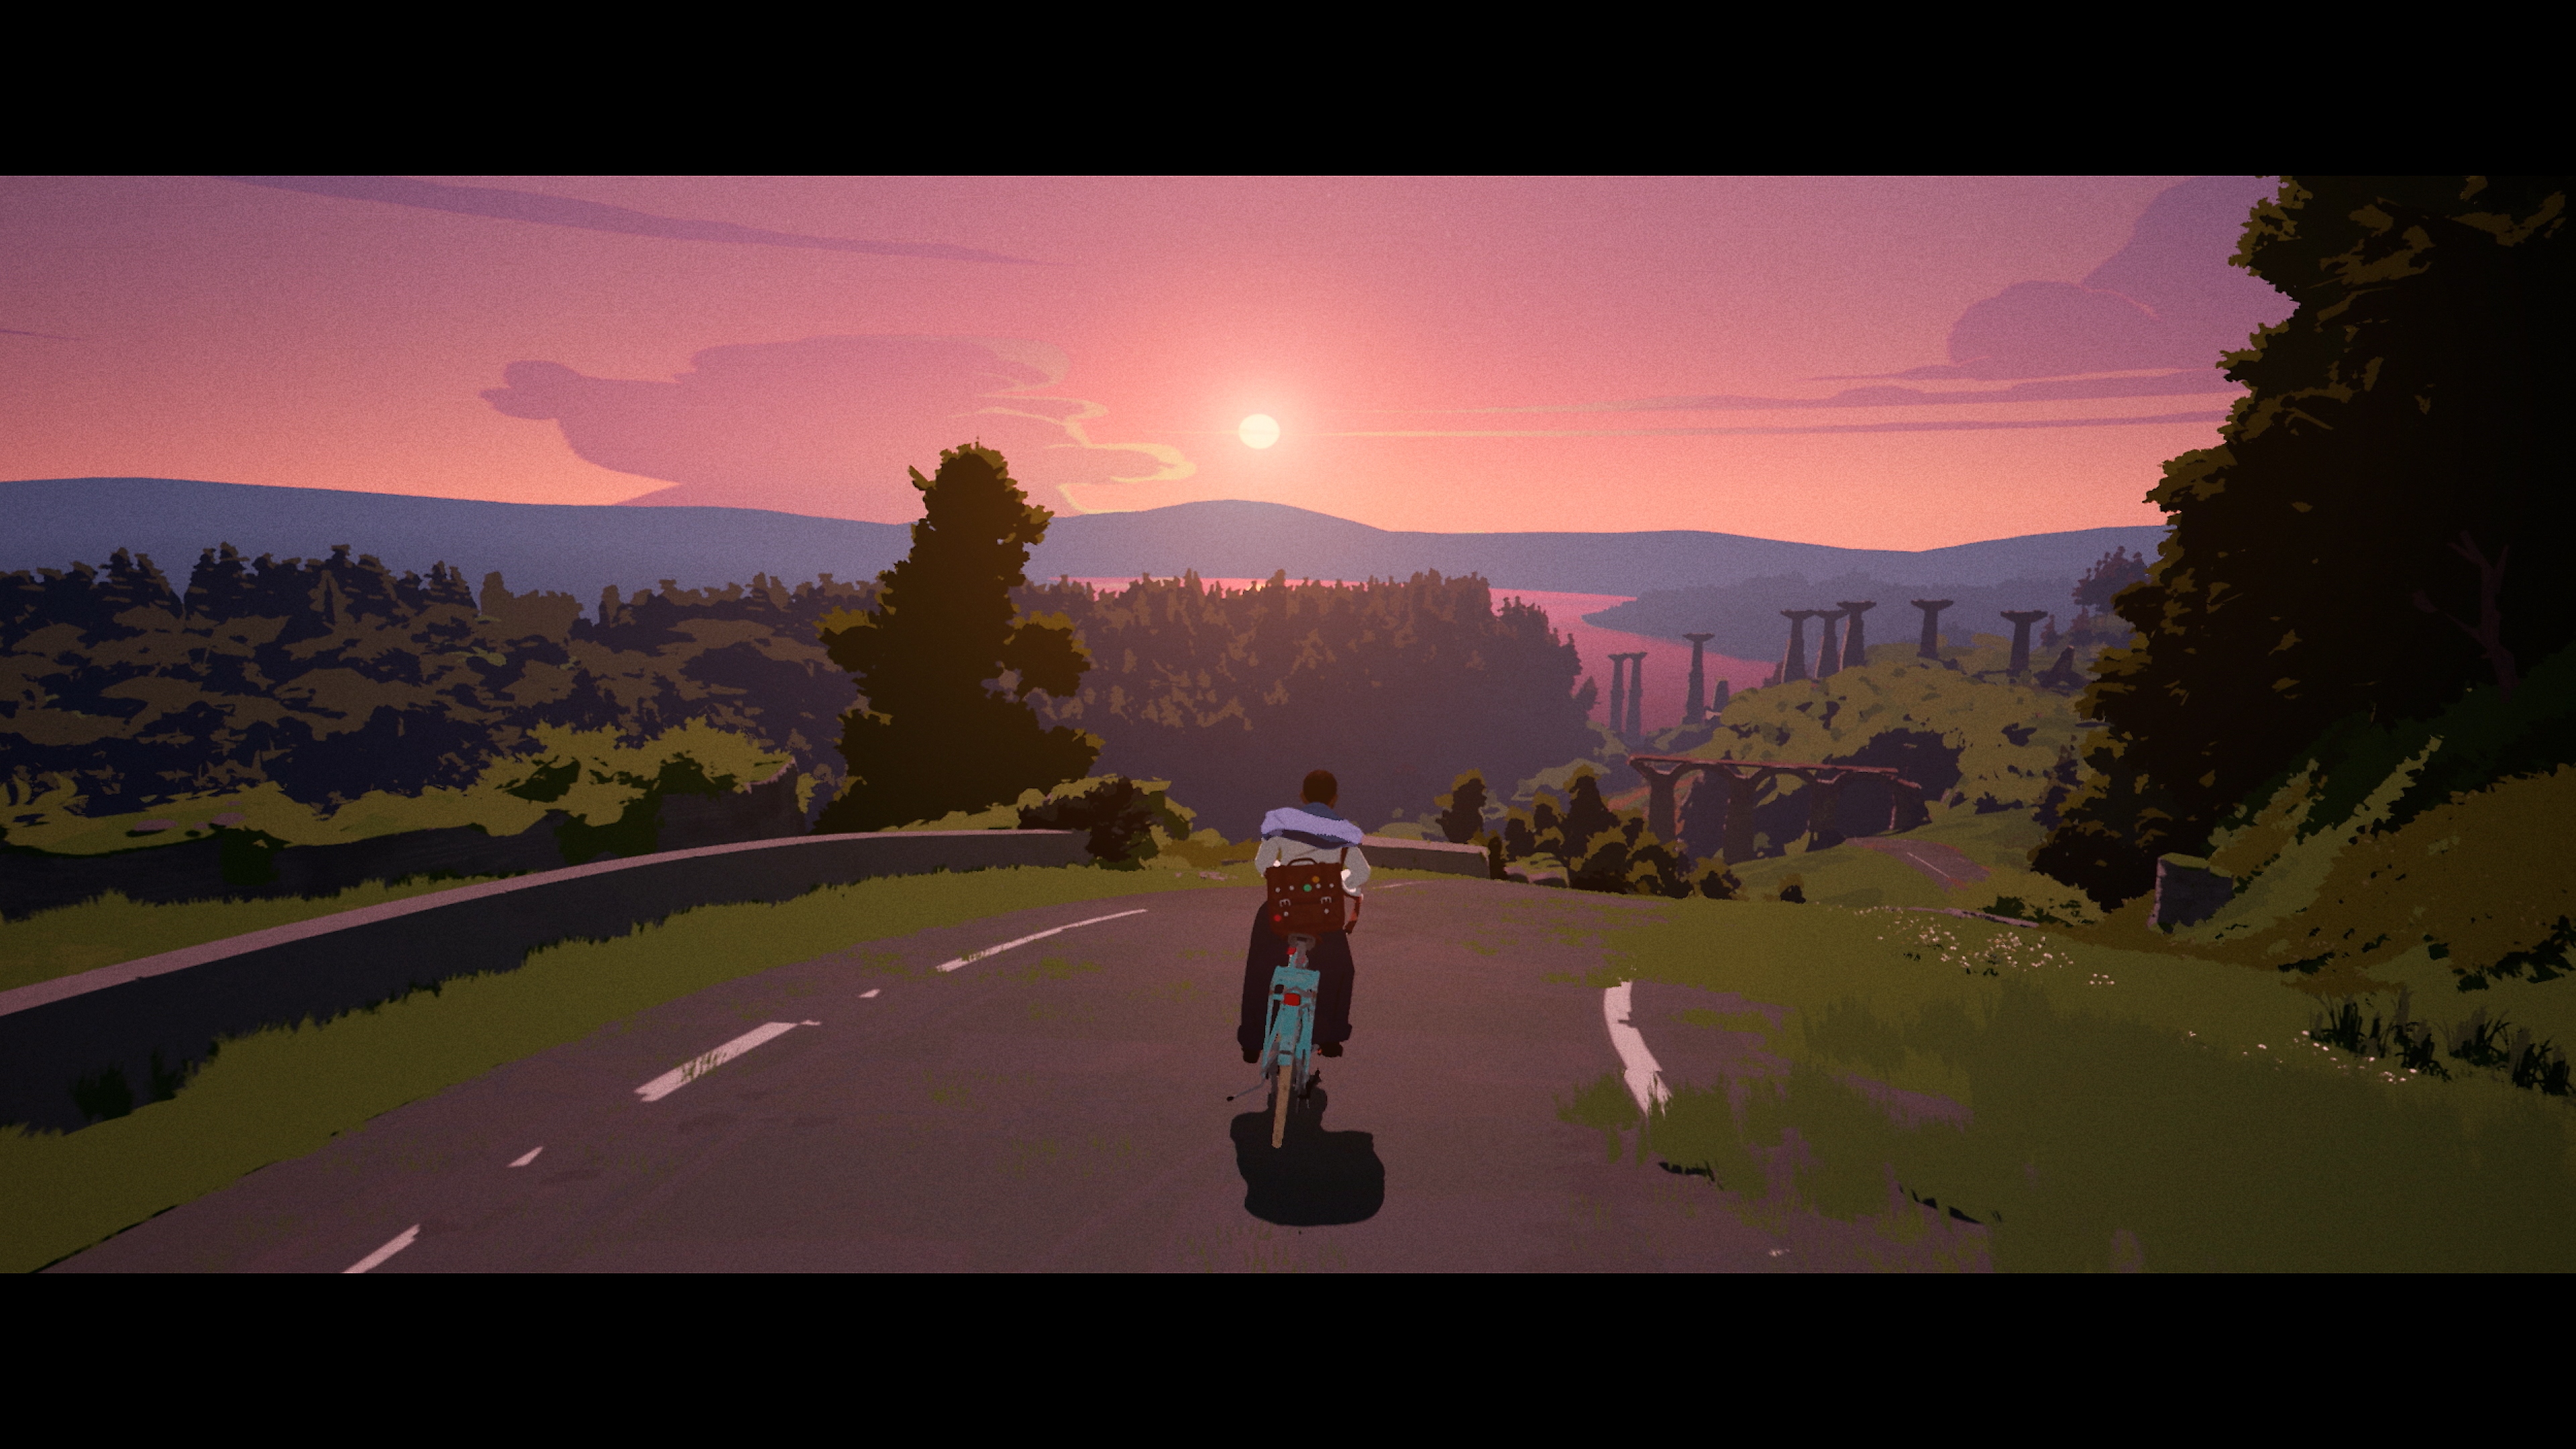 Season: A Letter to the Future screenshot showing the main character riding a bike under a pink sky